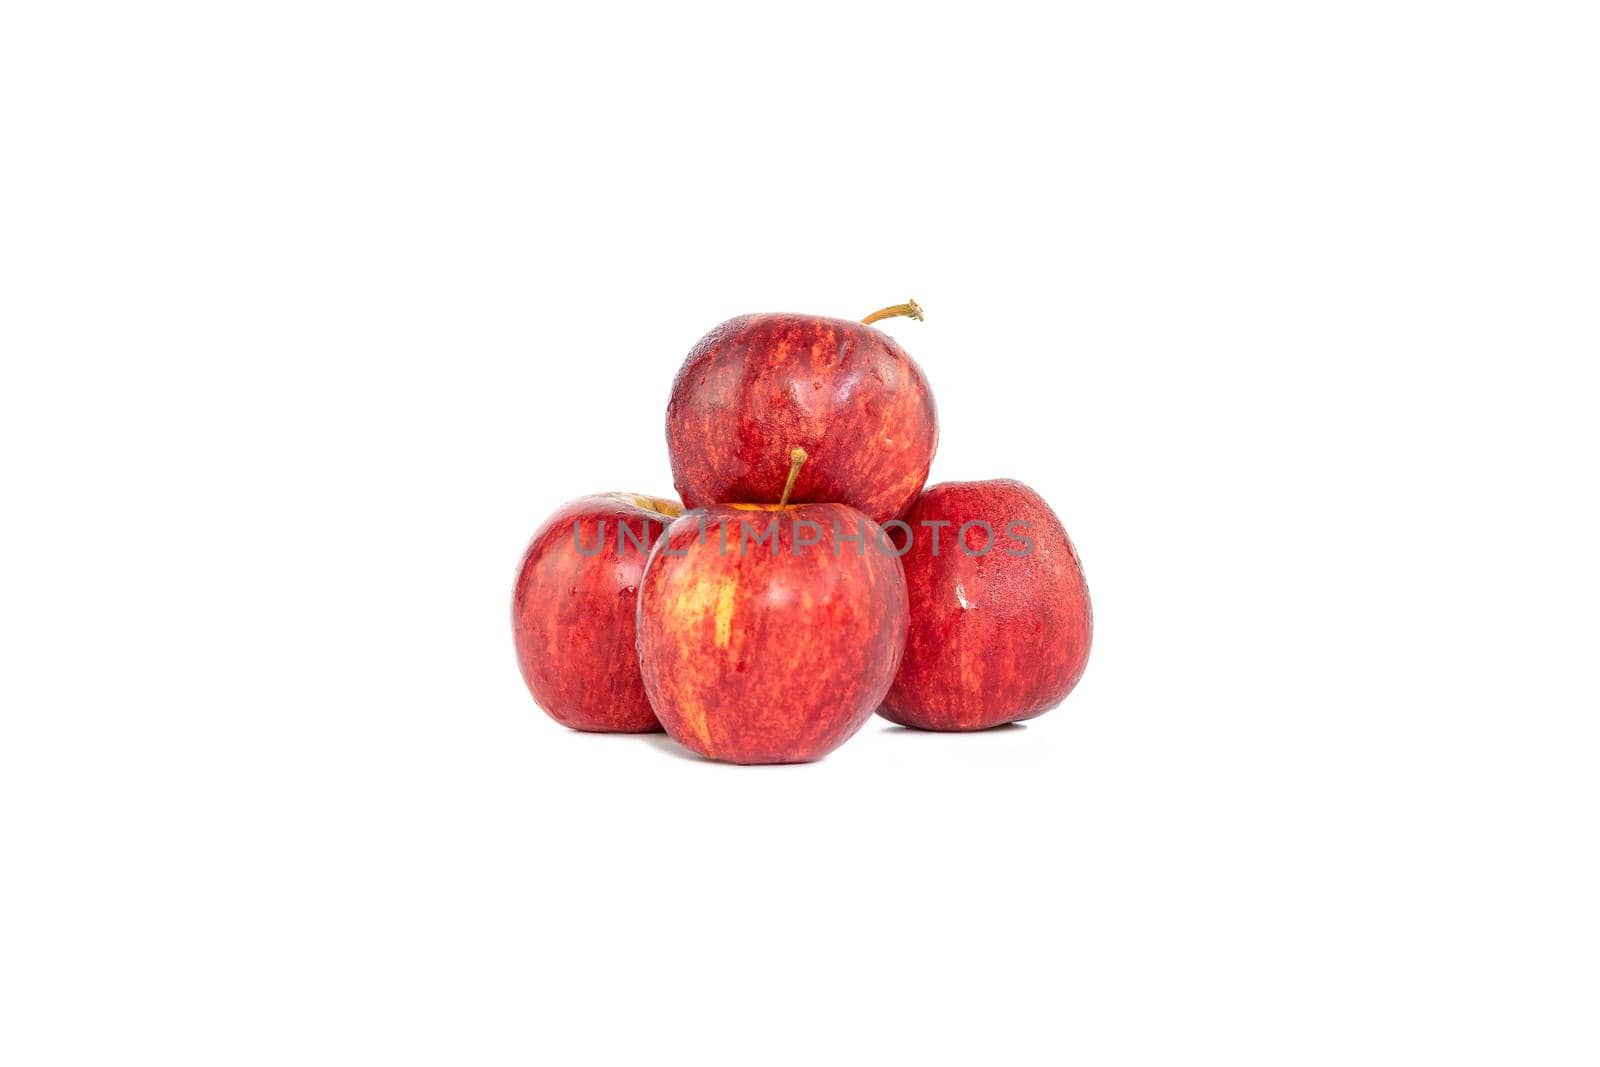 Group of red apples isolated on white background by wattanaphob